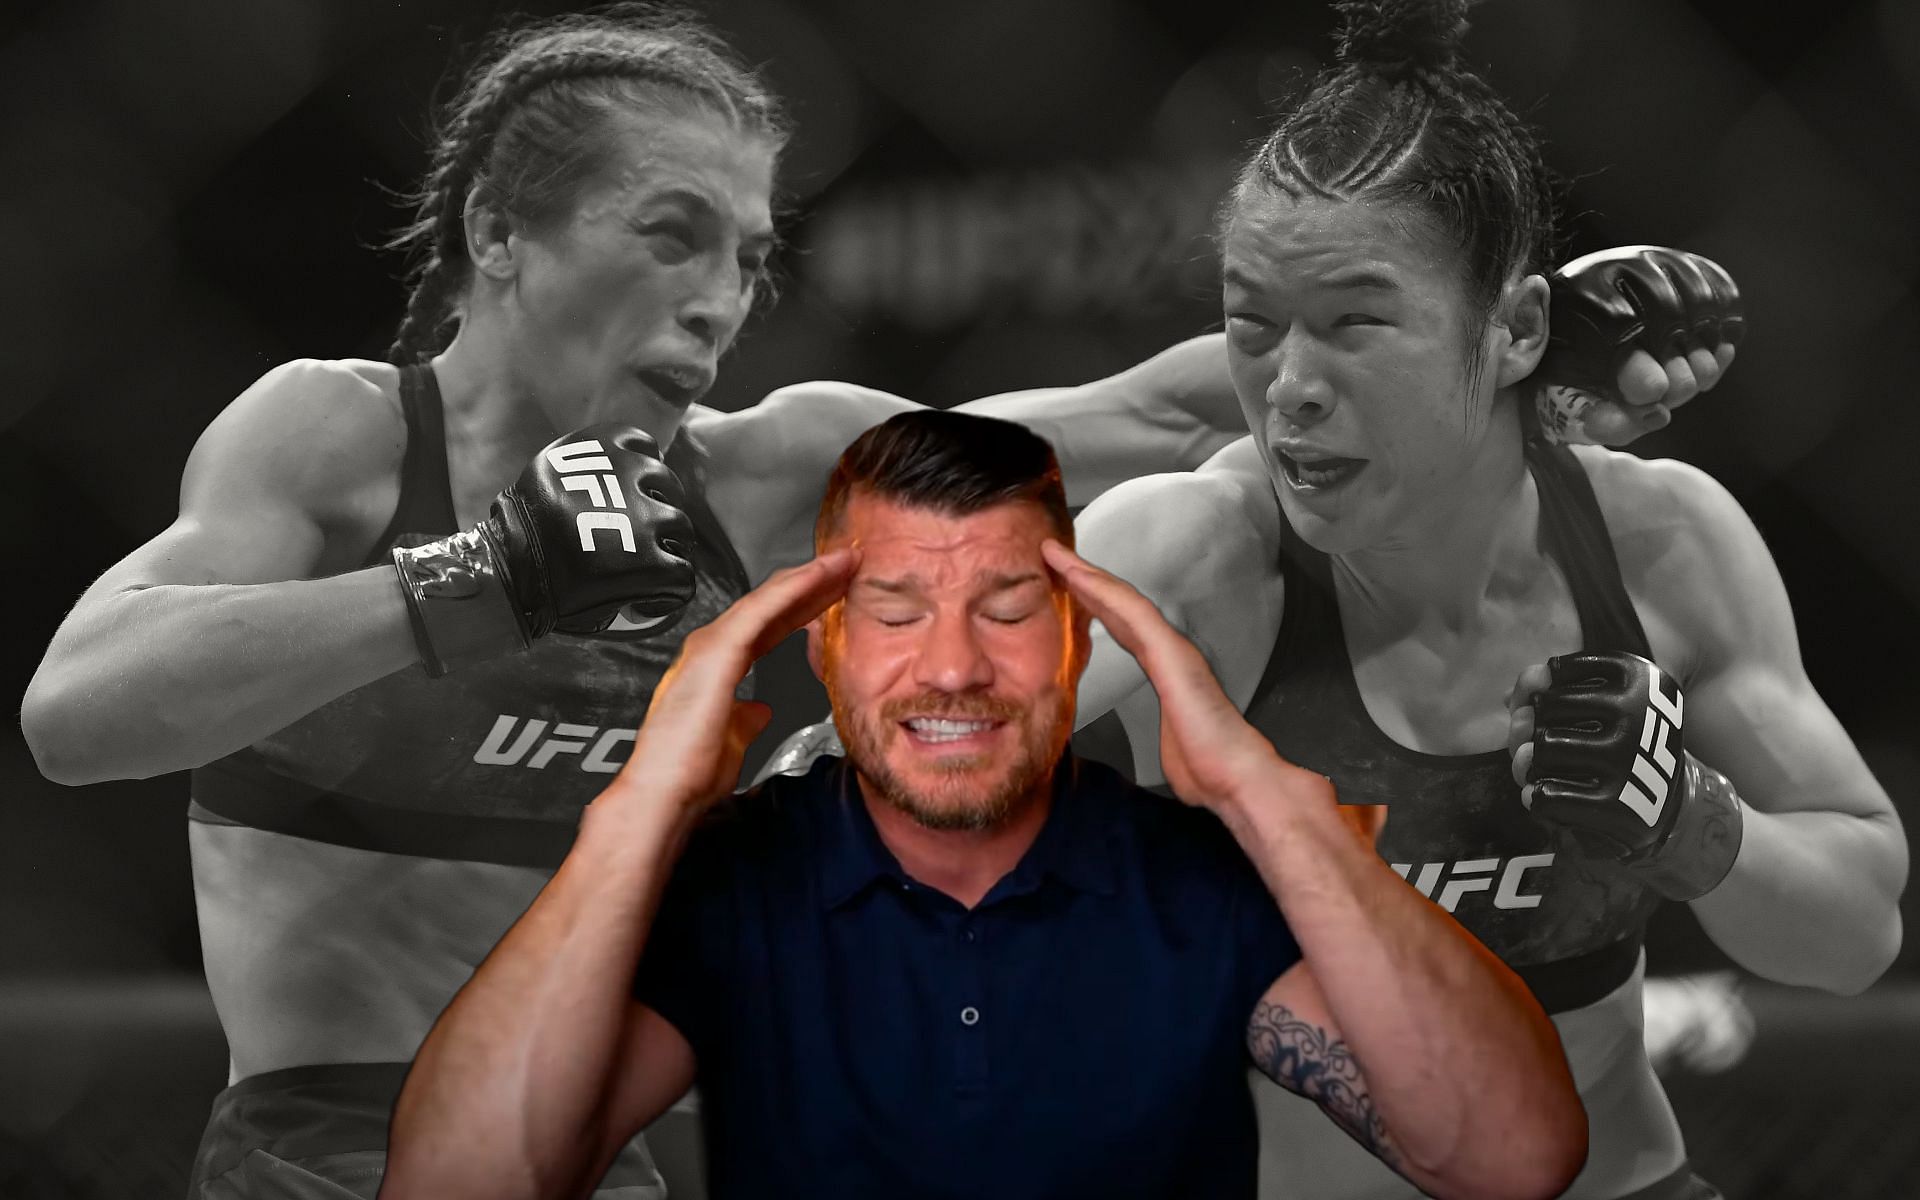 Joanna Jedrzejczyk (left), Michael Bisping (center) and Zhang Weili (right) (Images via Getty and YouTube/@MichaelBisping)